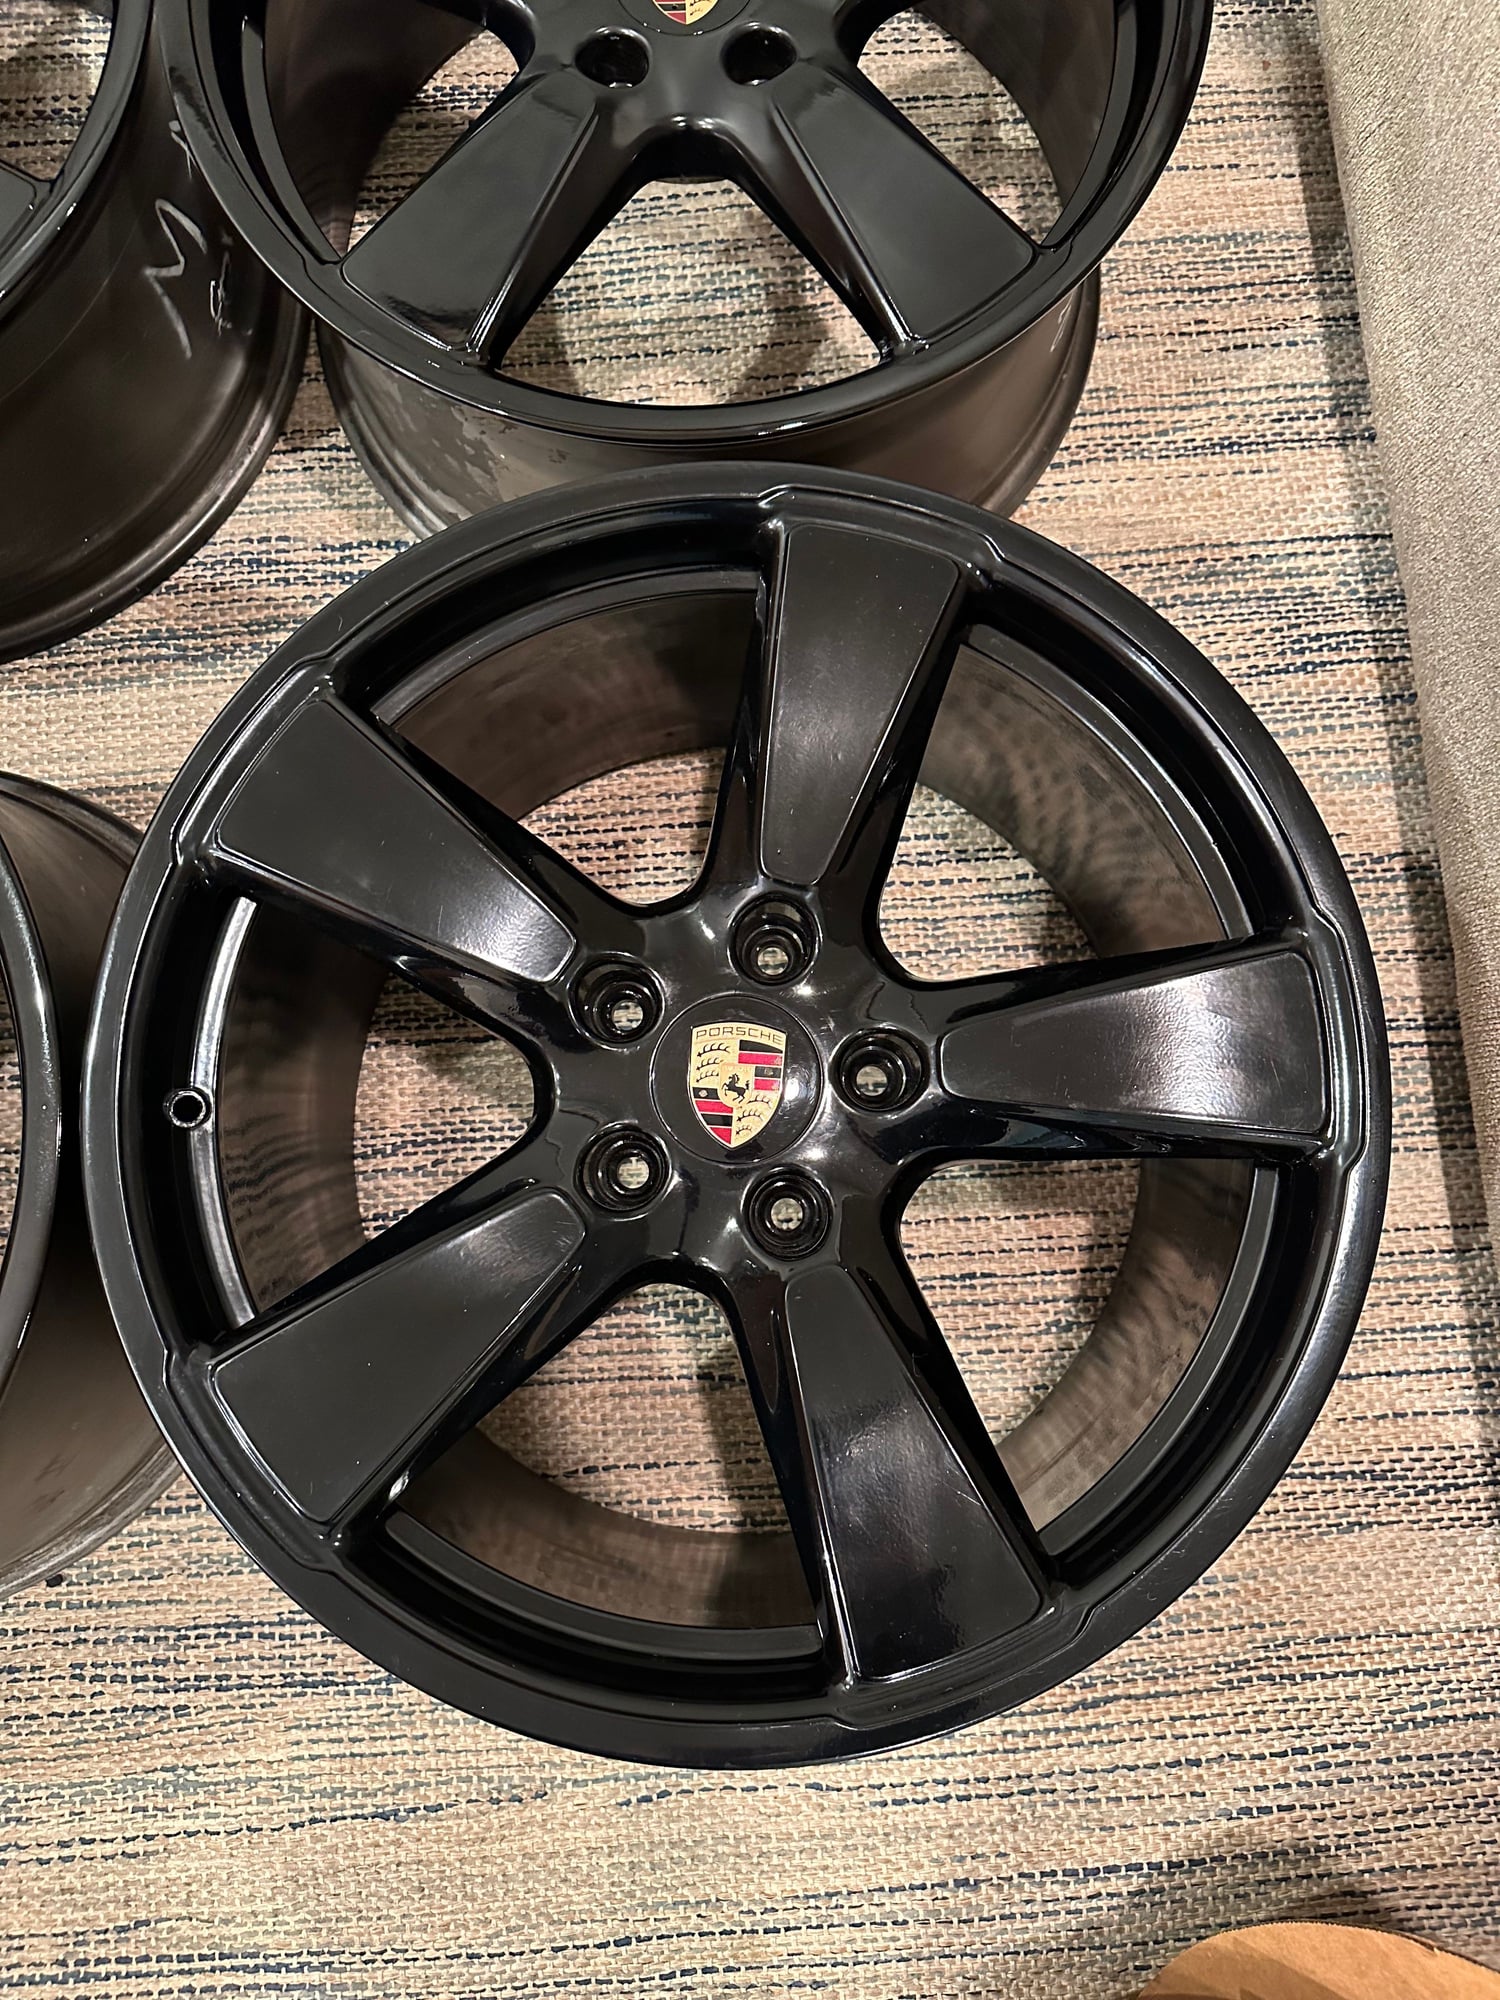 2020 Porsche Cayenne - 20" OEM Panamera Sport Classic Wheels - Black - Excellent - Wheels and Tires/Axles - $2,250 - Plymouth, MN 55447, United States